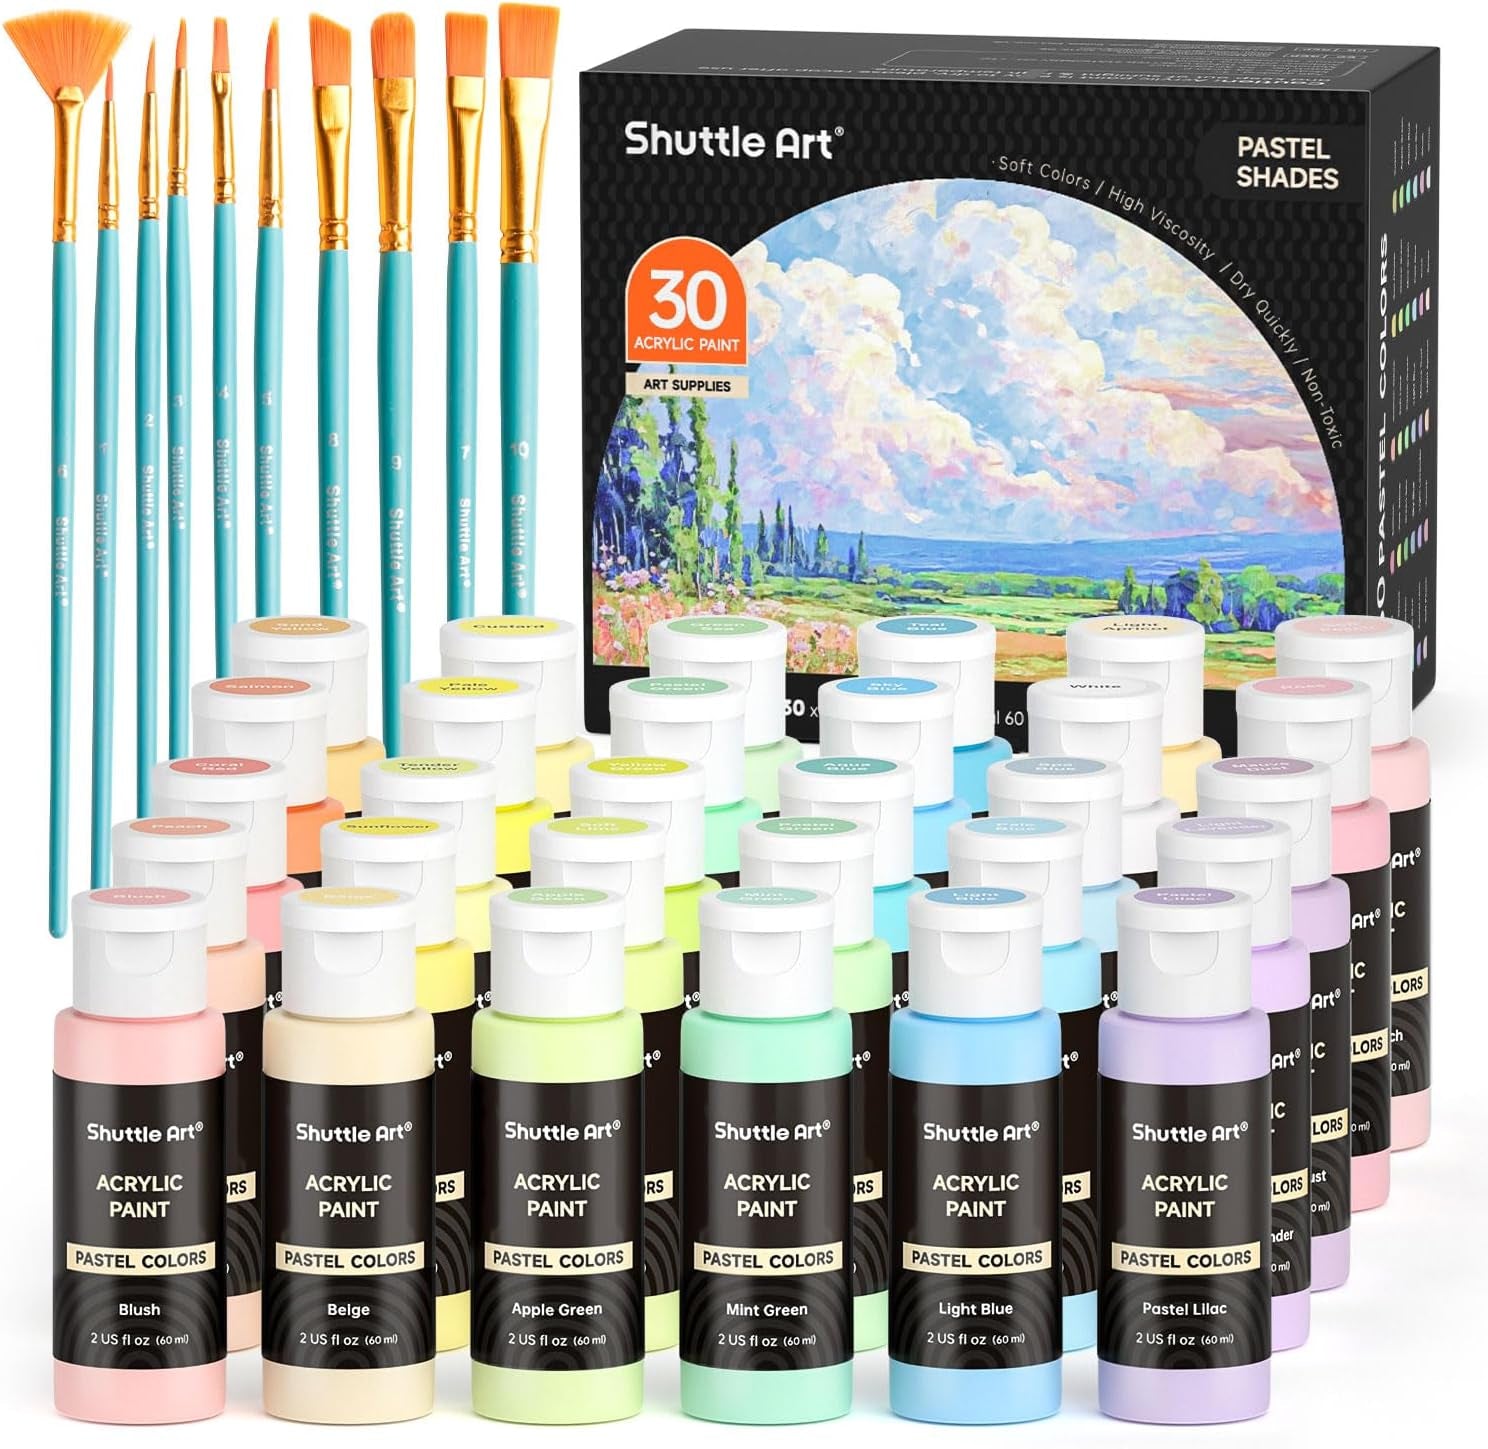 54 Colors Acrylic Paint,  Acrylic Paint Set with 12 Paint Brushes, 2Oz/60Ml Bottles, Rich Pigmented, Water Proof, Premium Paints for Artists, Beginners and Kids on Canvas Rocks Wood Ceramic